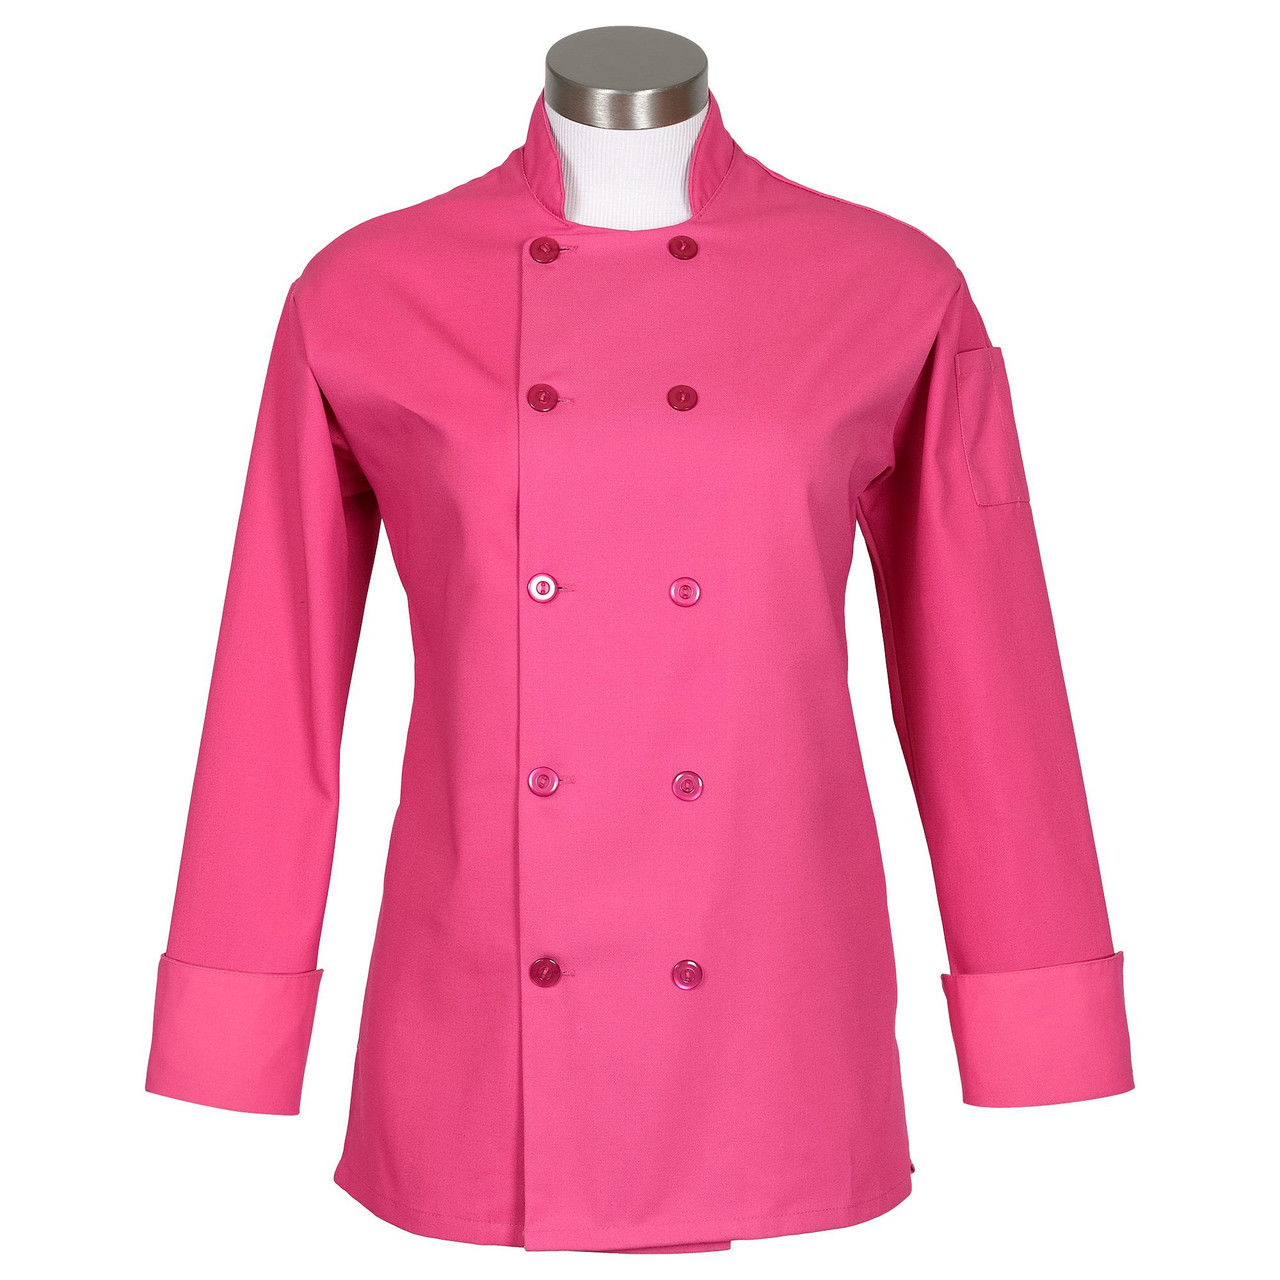 Does the chef coats womens long sleeve have a specific type of closure?